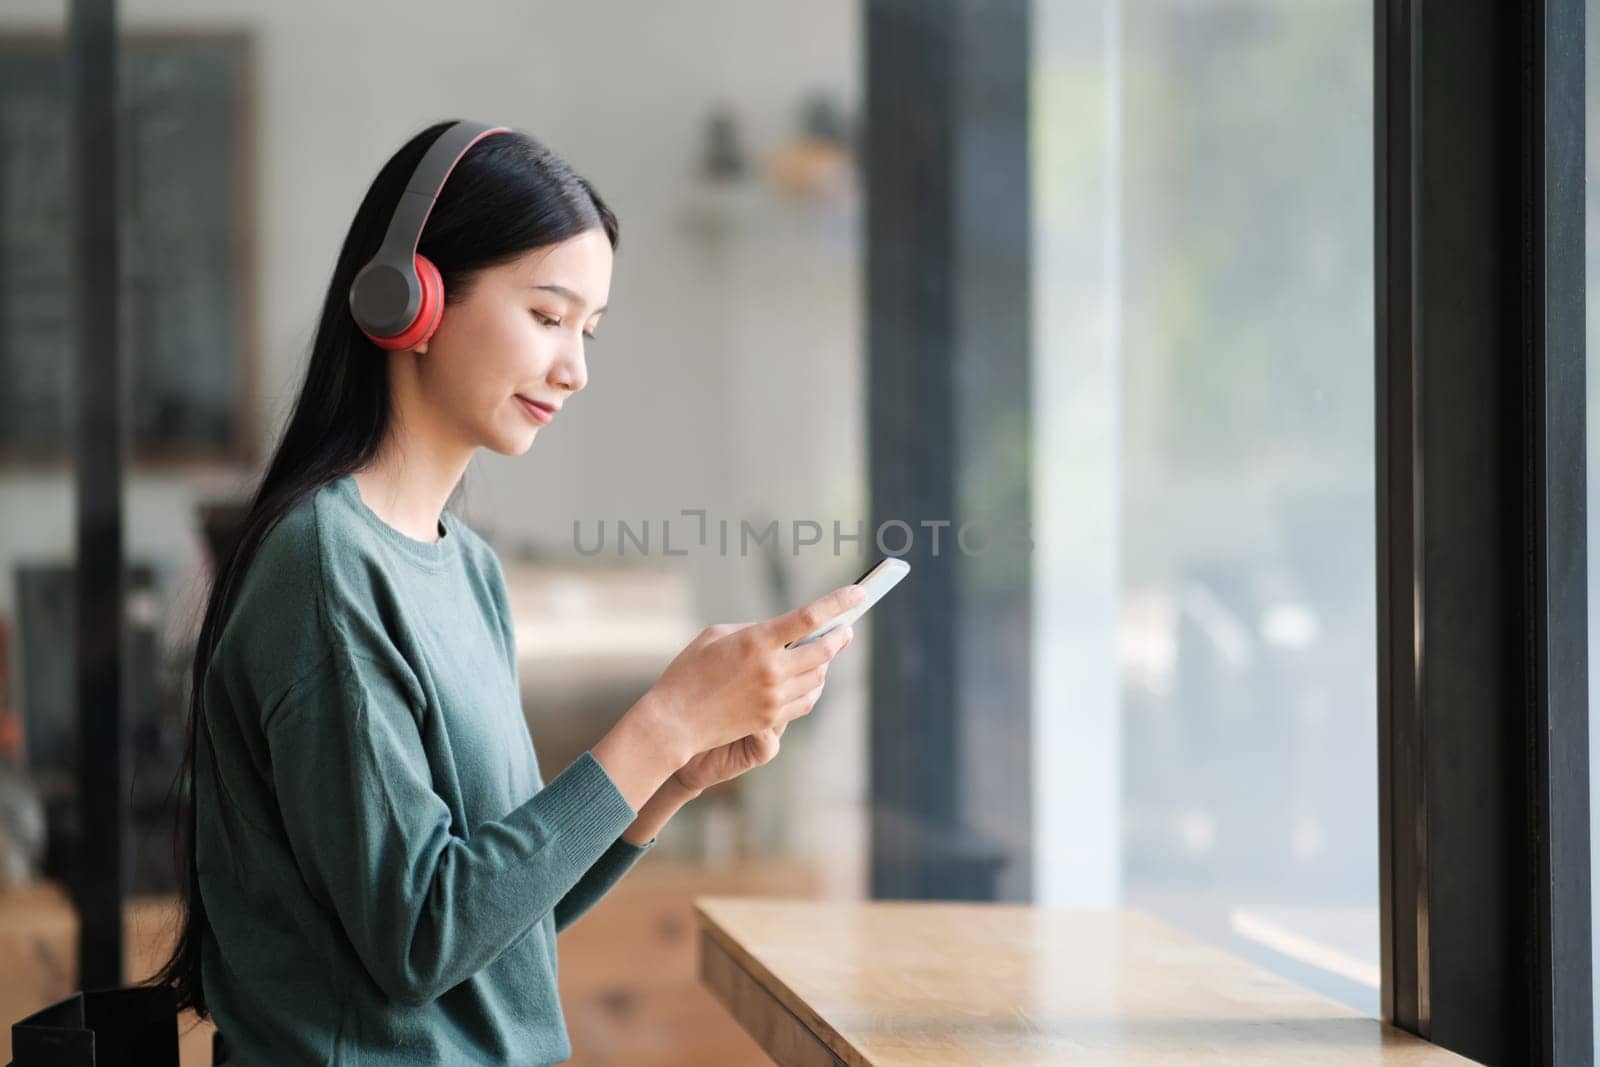 A woman is sitting at a table with a cell phone in her hand. She is wearing headphones and she is listening to music